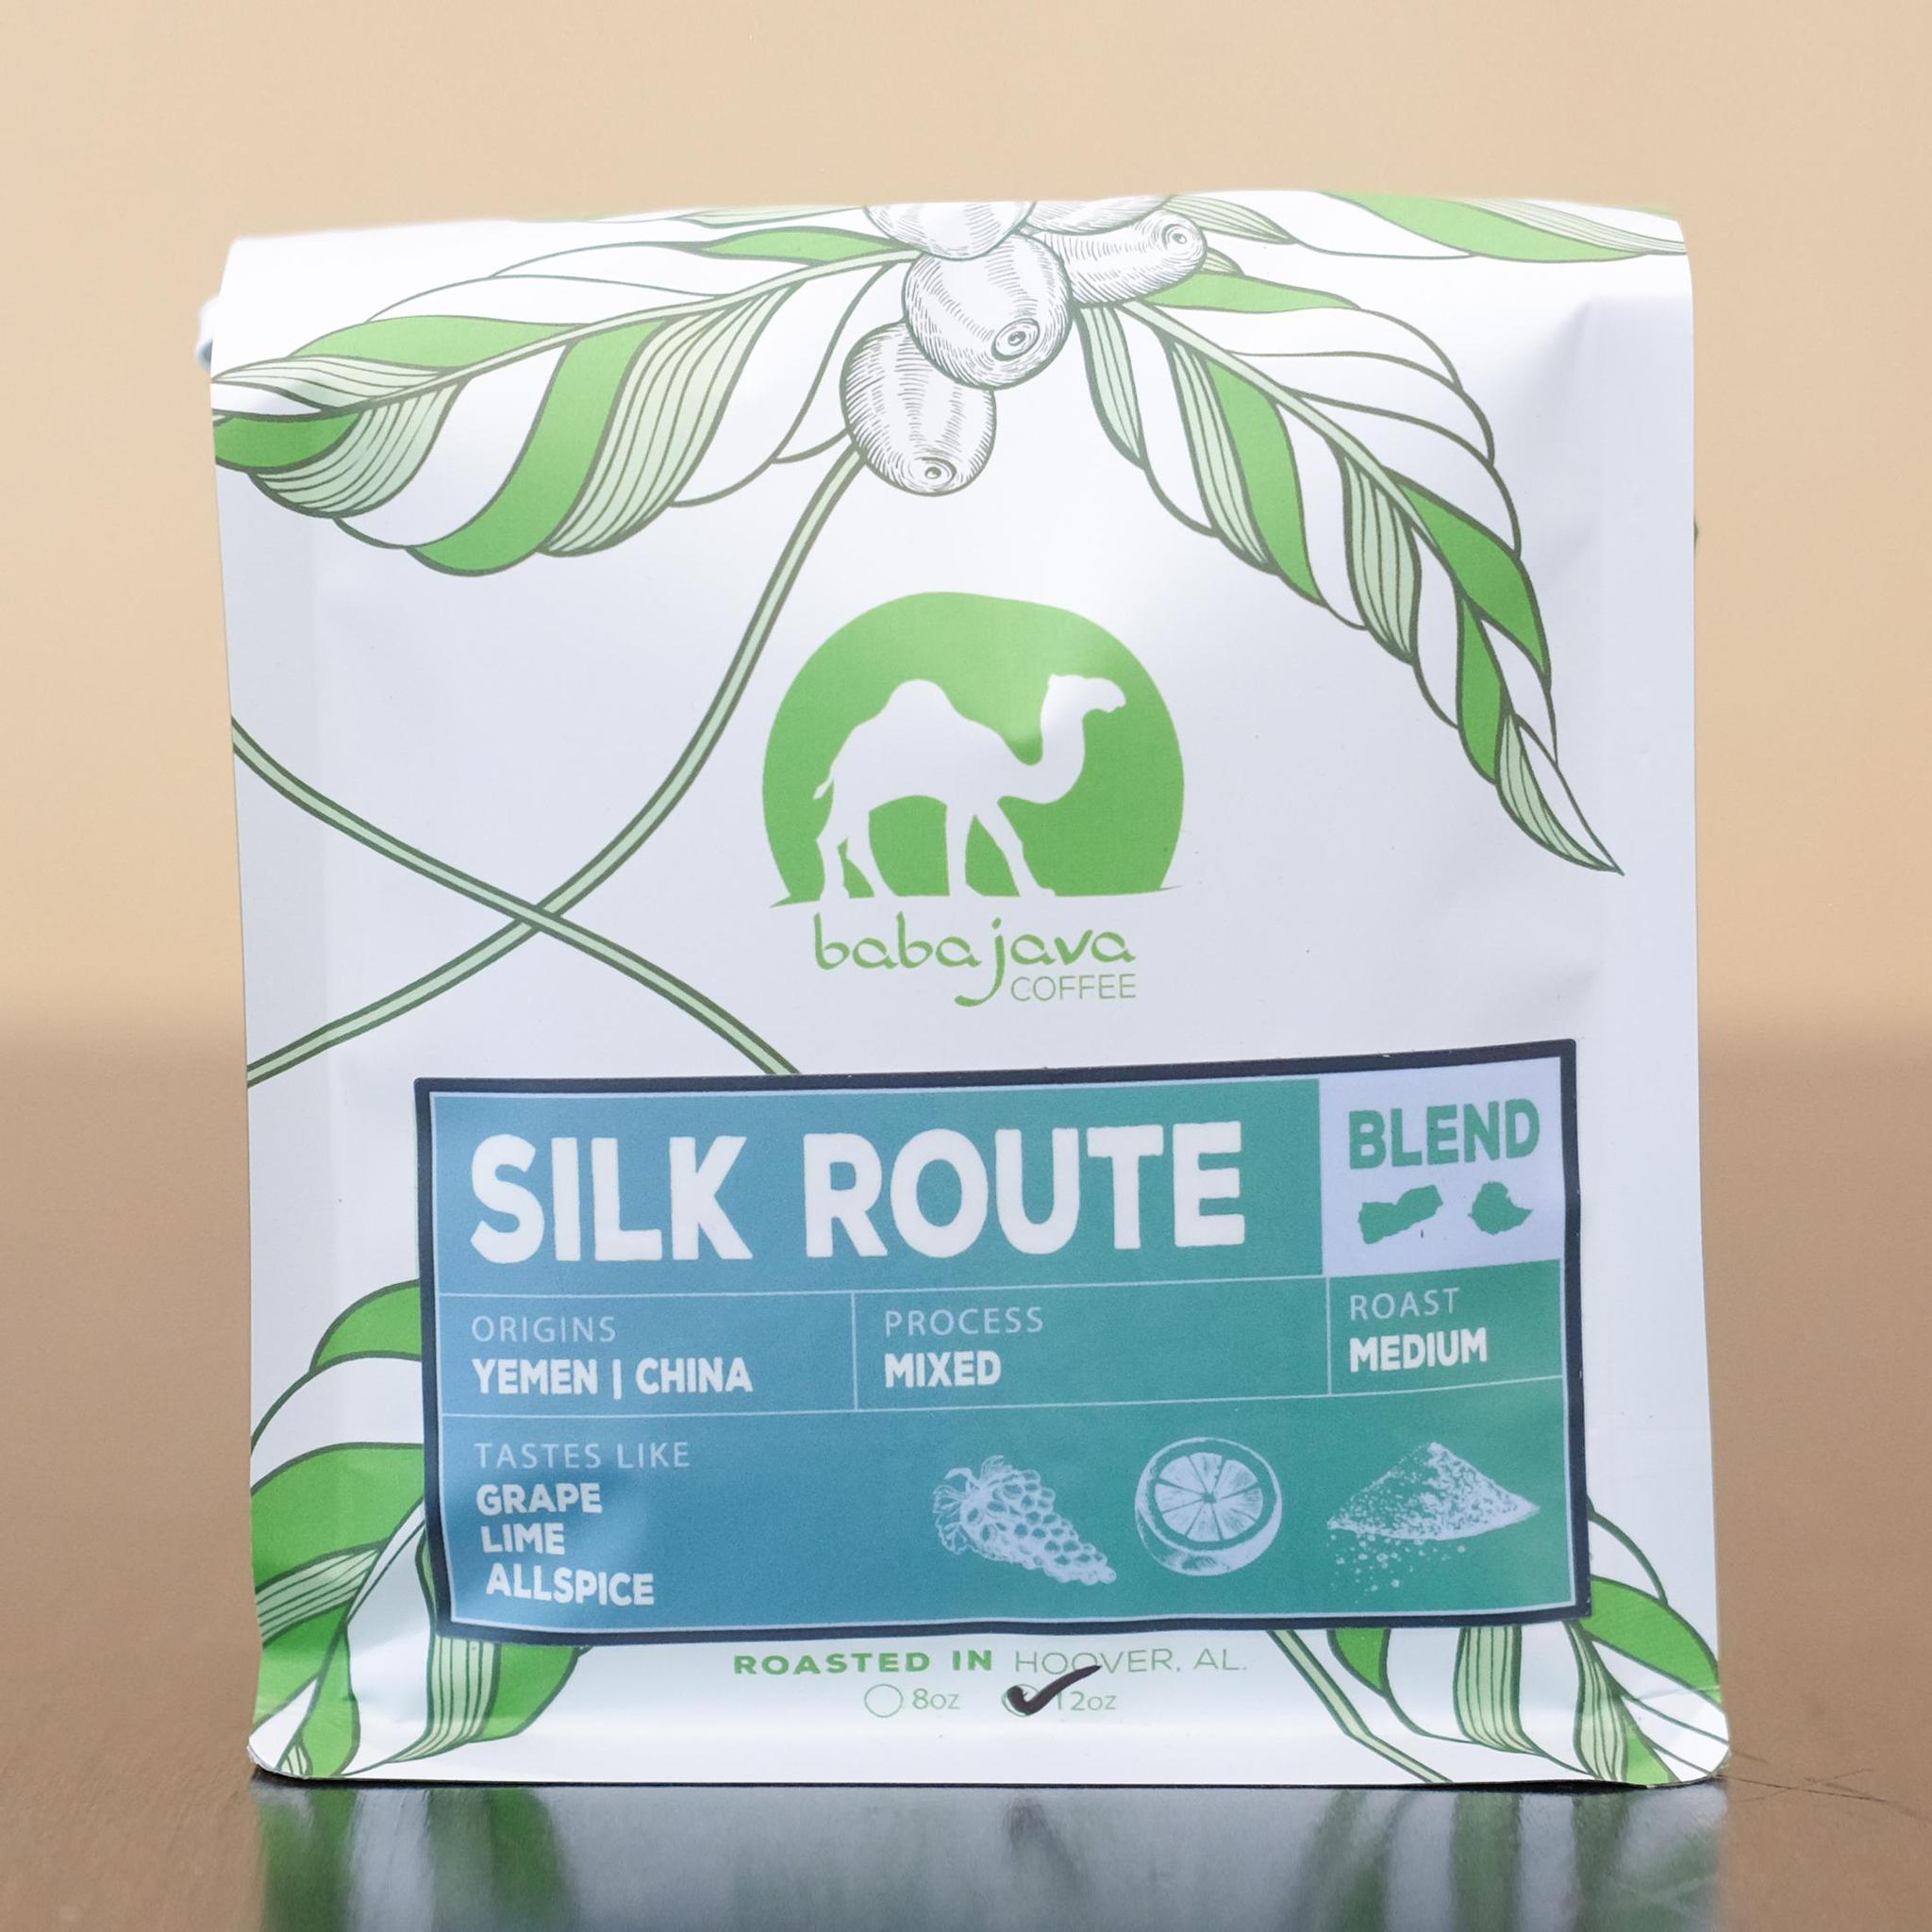 A bag of coffee with a blue-green label that reads Silk Route. The bag has a drawing of a coffee plant and the Baba Java Coffee logo.